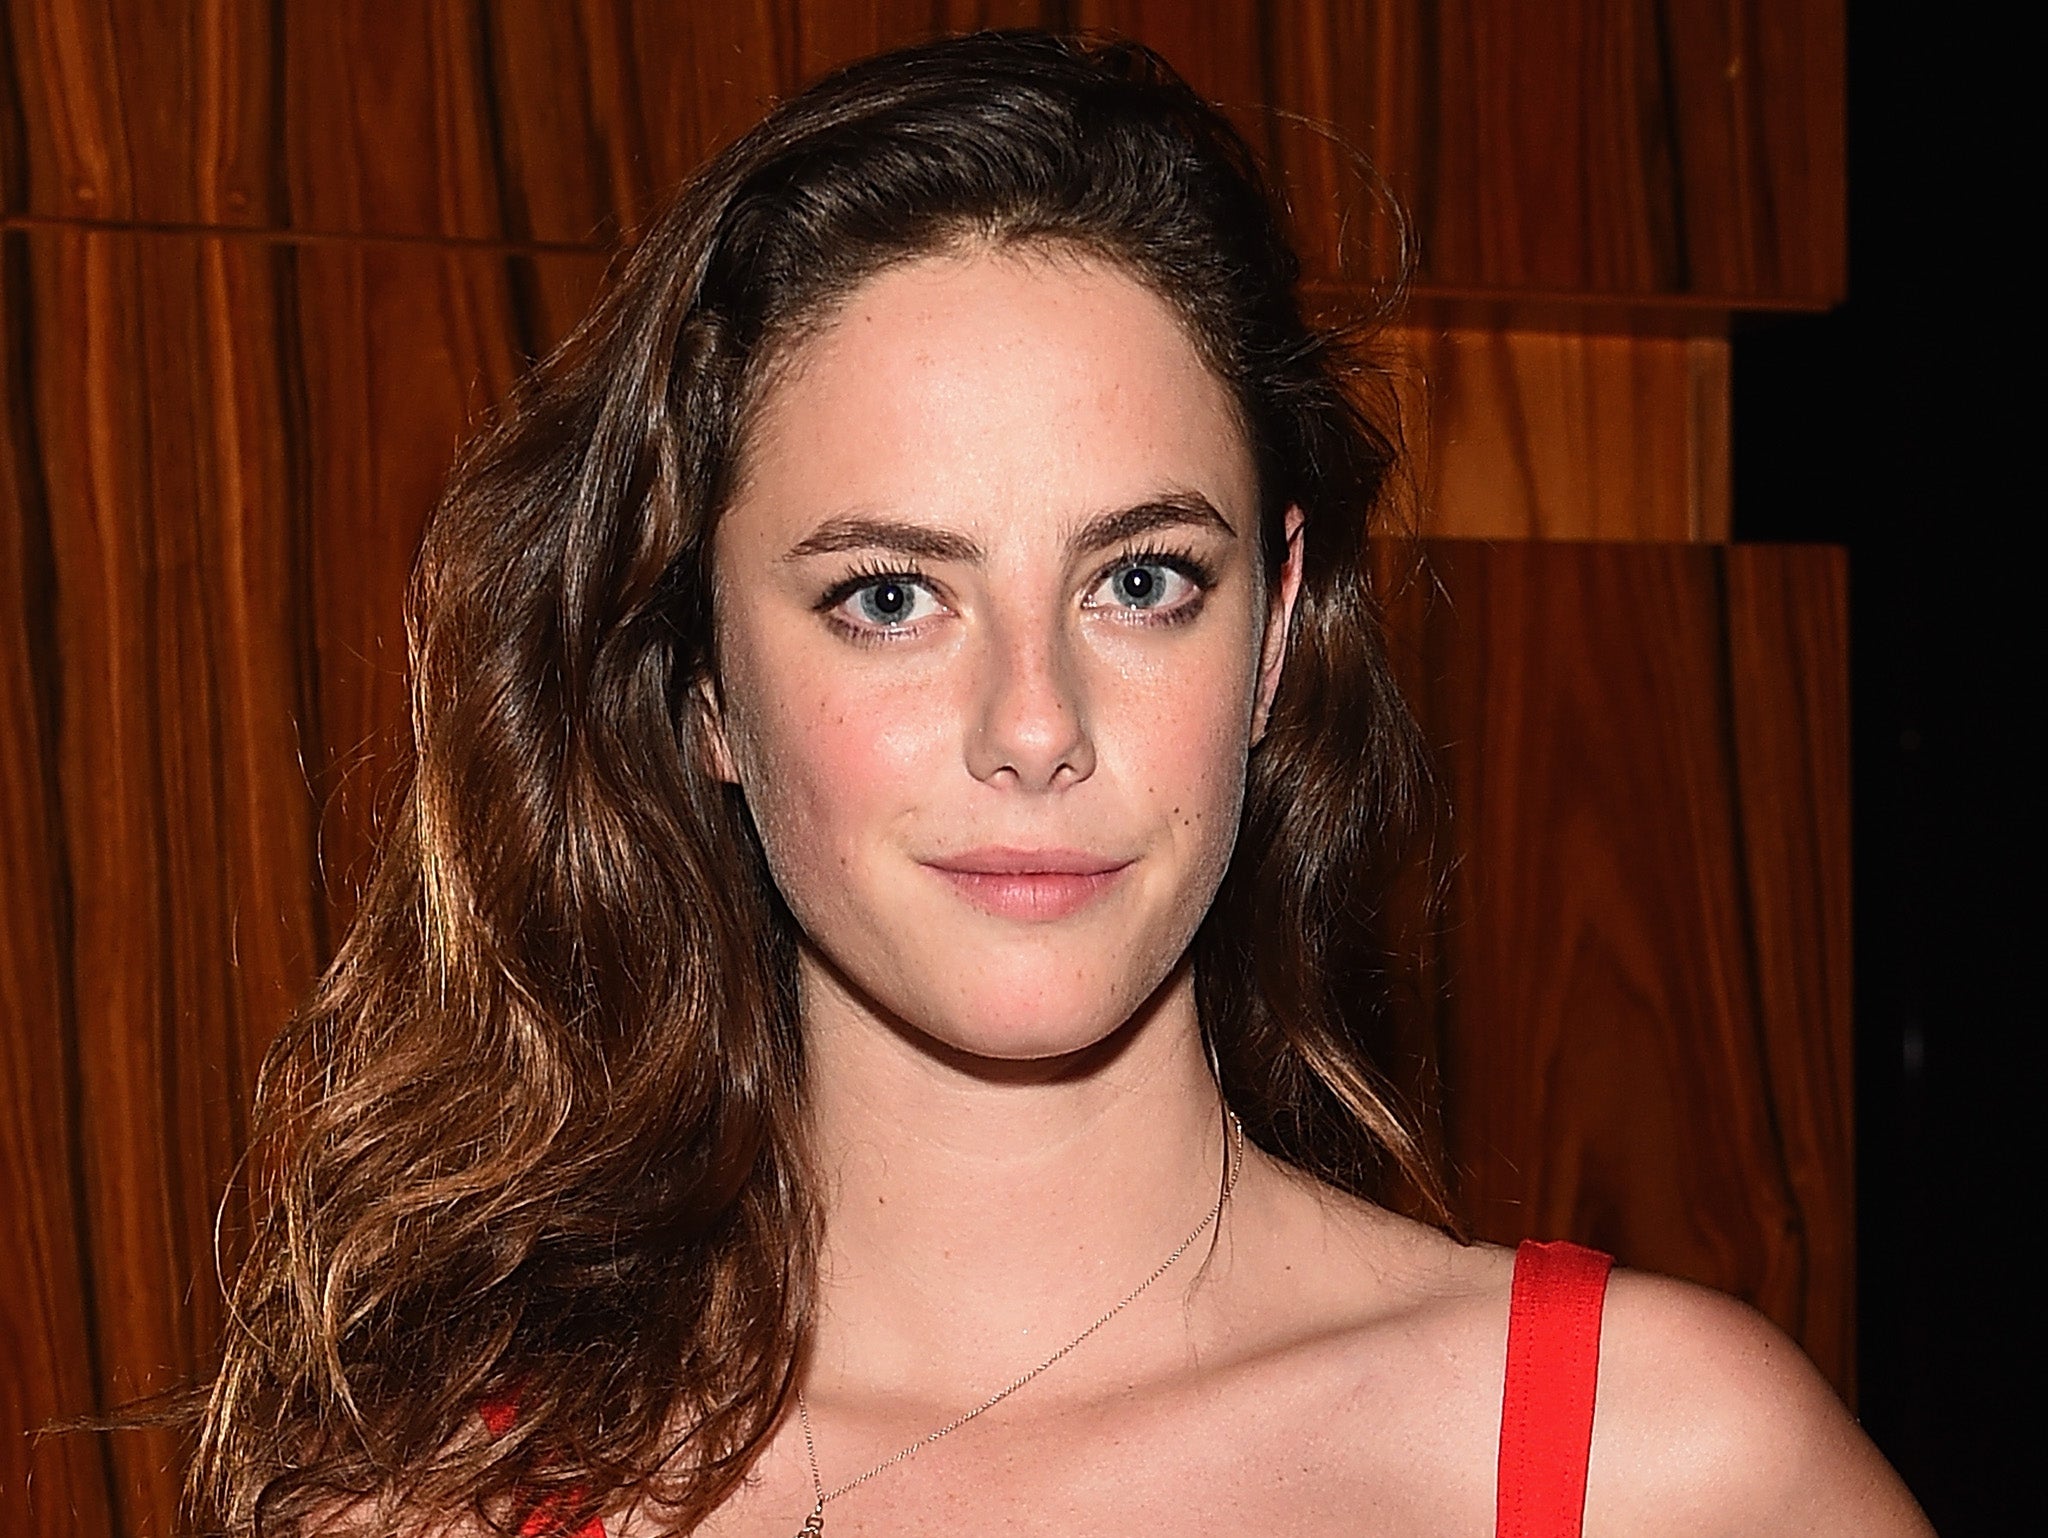 Pirates Of The Caribbean 5 Kaya Scodelario Confirmed To Star In Sequel